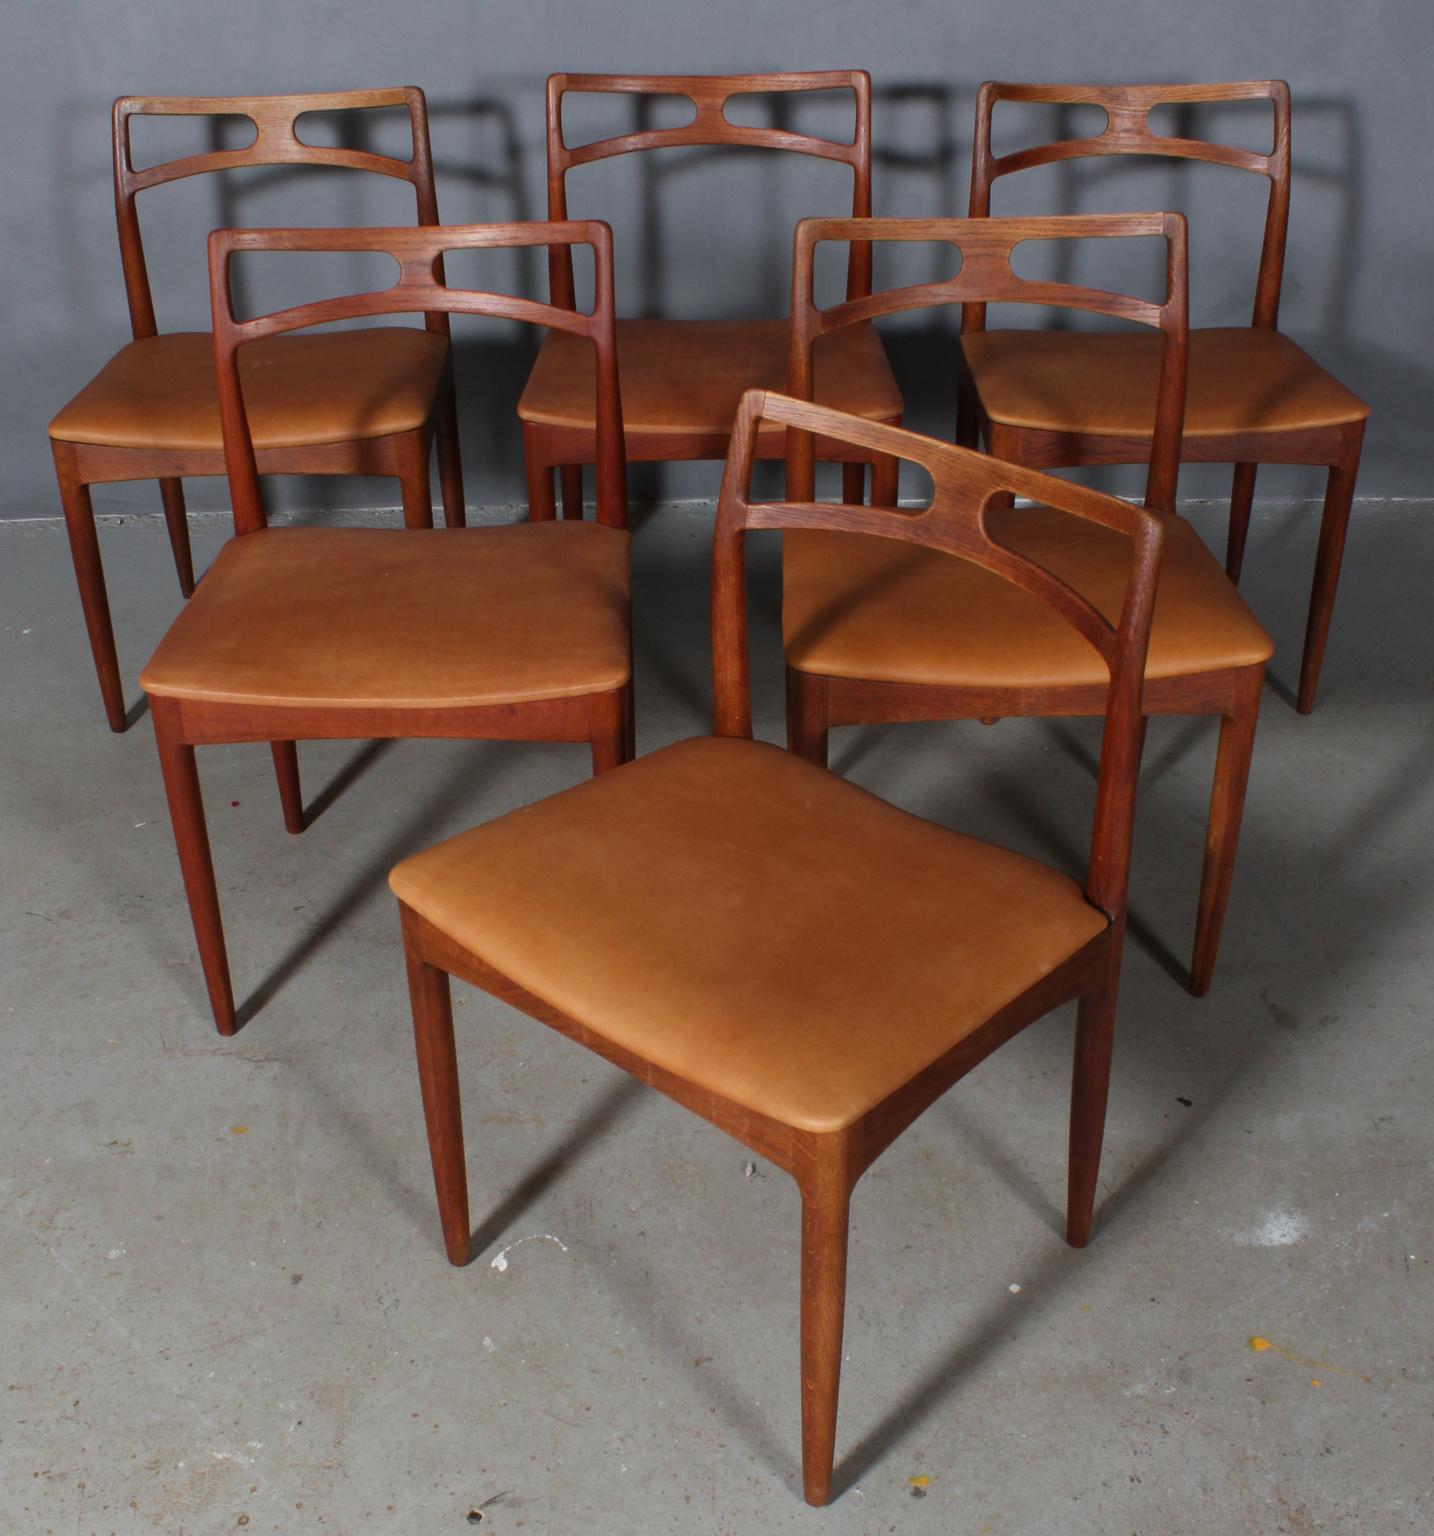 Six beautiful Johannes Andersen dining chairs with solid teak frame.

New upholstered with cognac aniline leather.

Model 96, made by Christian Linneberg.
    